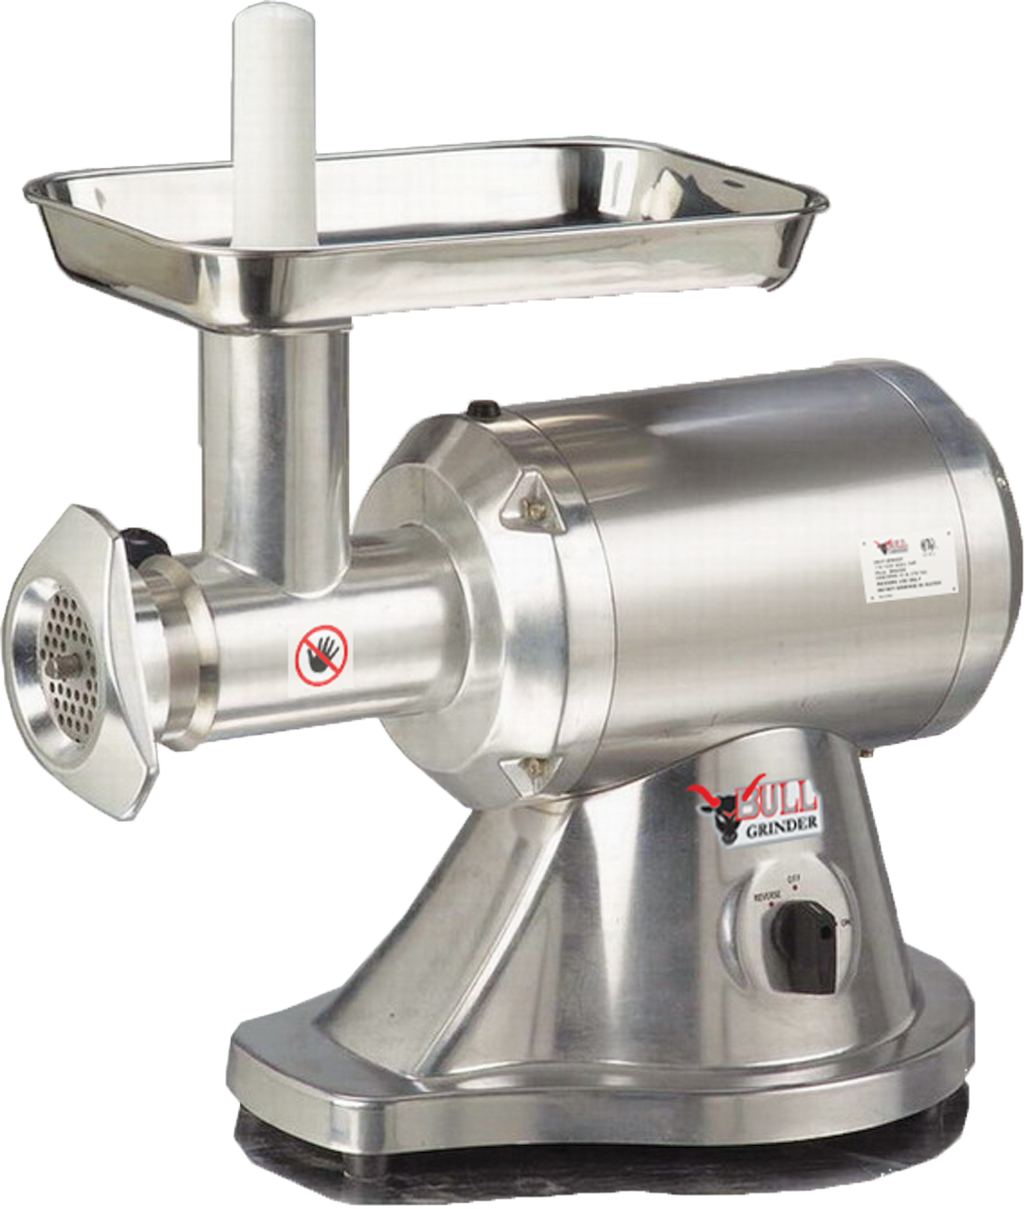 Electric Meat Grinder, Heavy Duty Meat Mincer, Food Grinder with